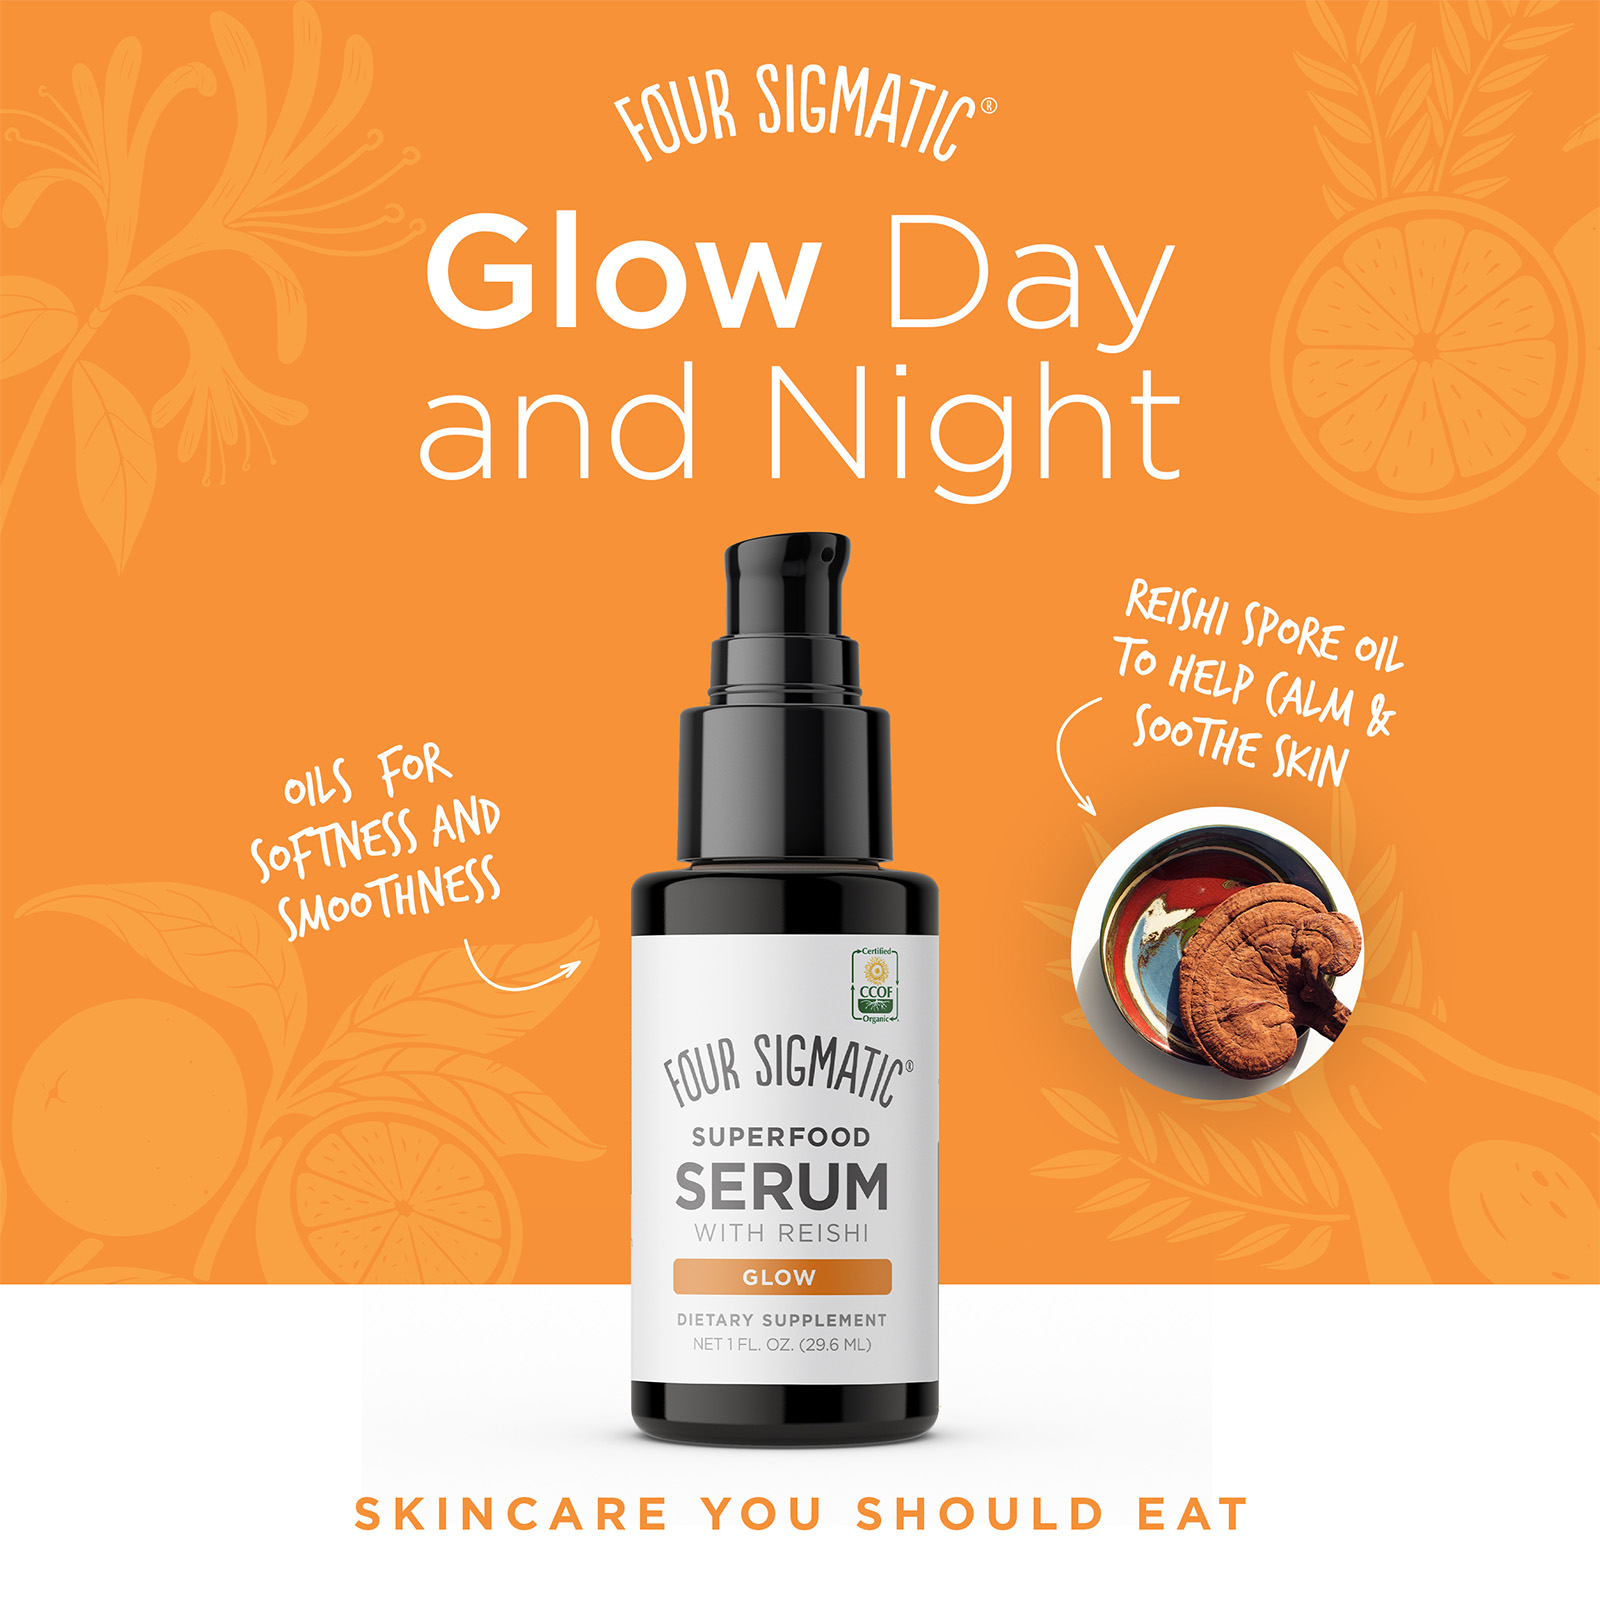 Glow day and night, reishi spore oil to help calm and soothe skin,oils for softness and smoothness